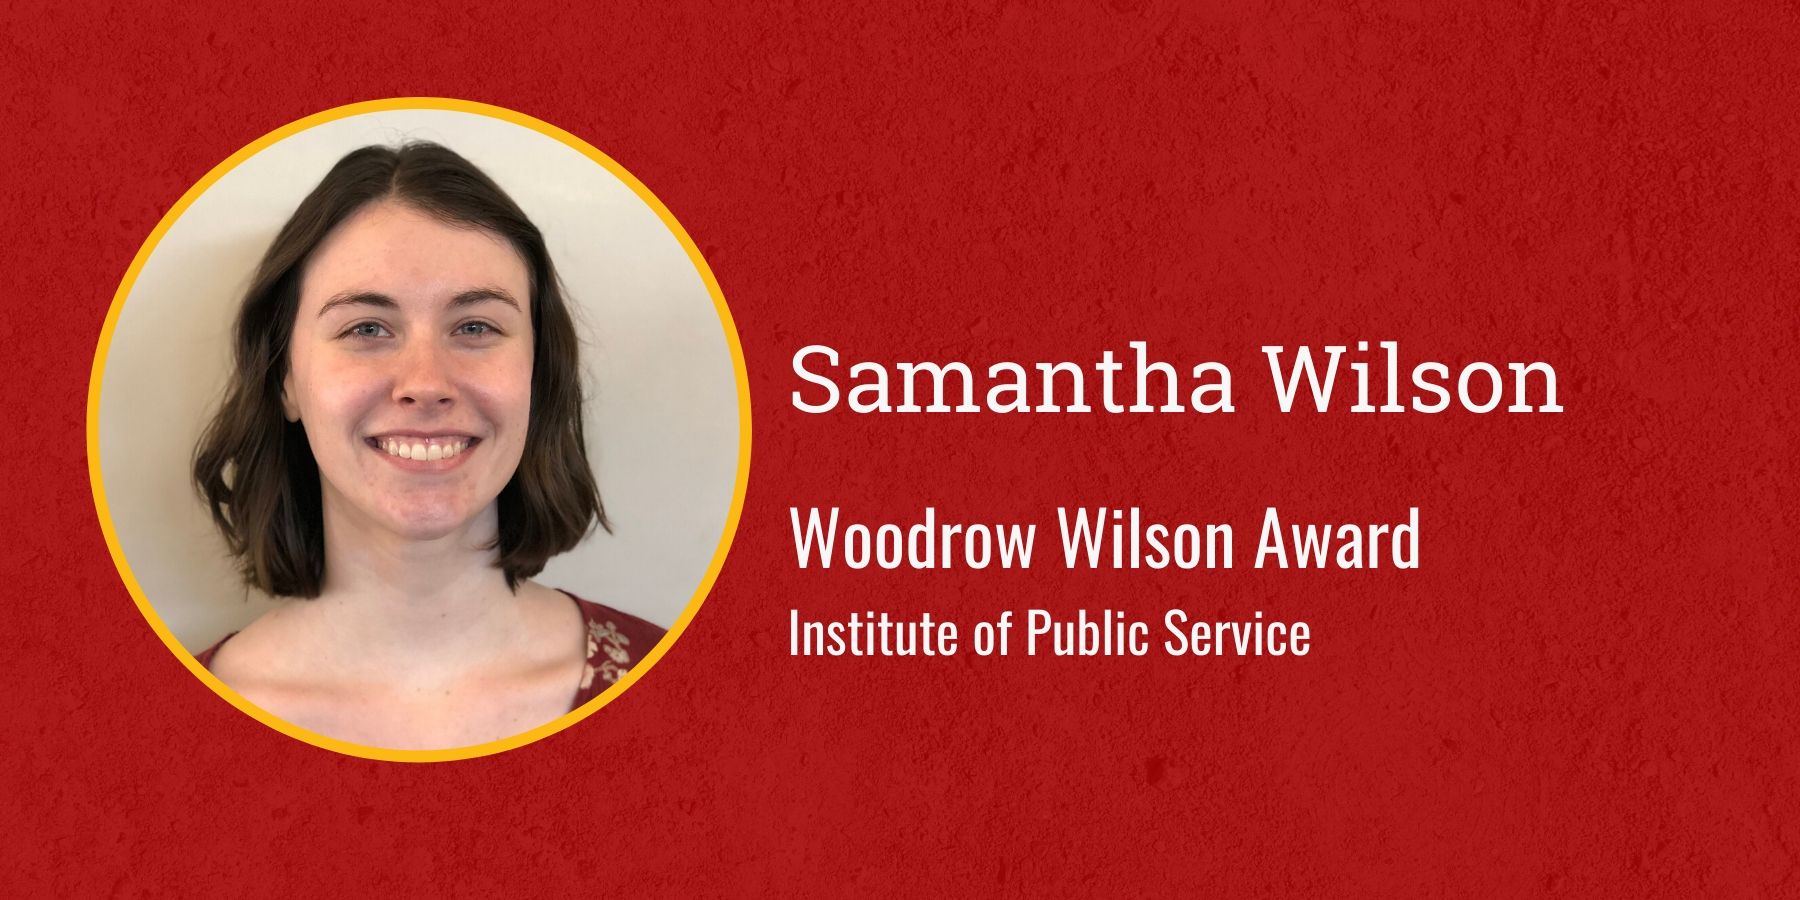 Photo of Samantha Wilson and text Woodrow Wilson Award, Institute of Public Service